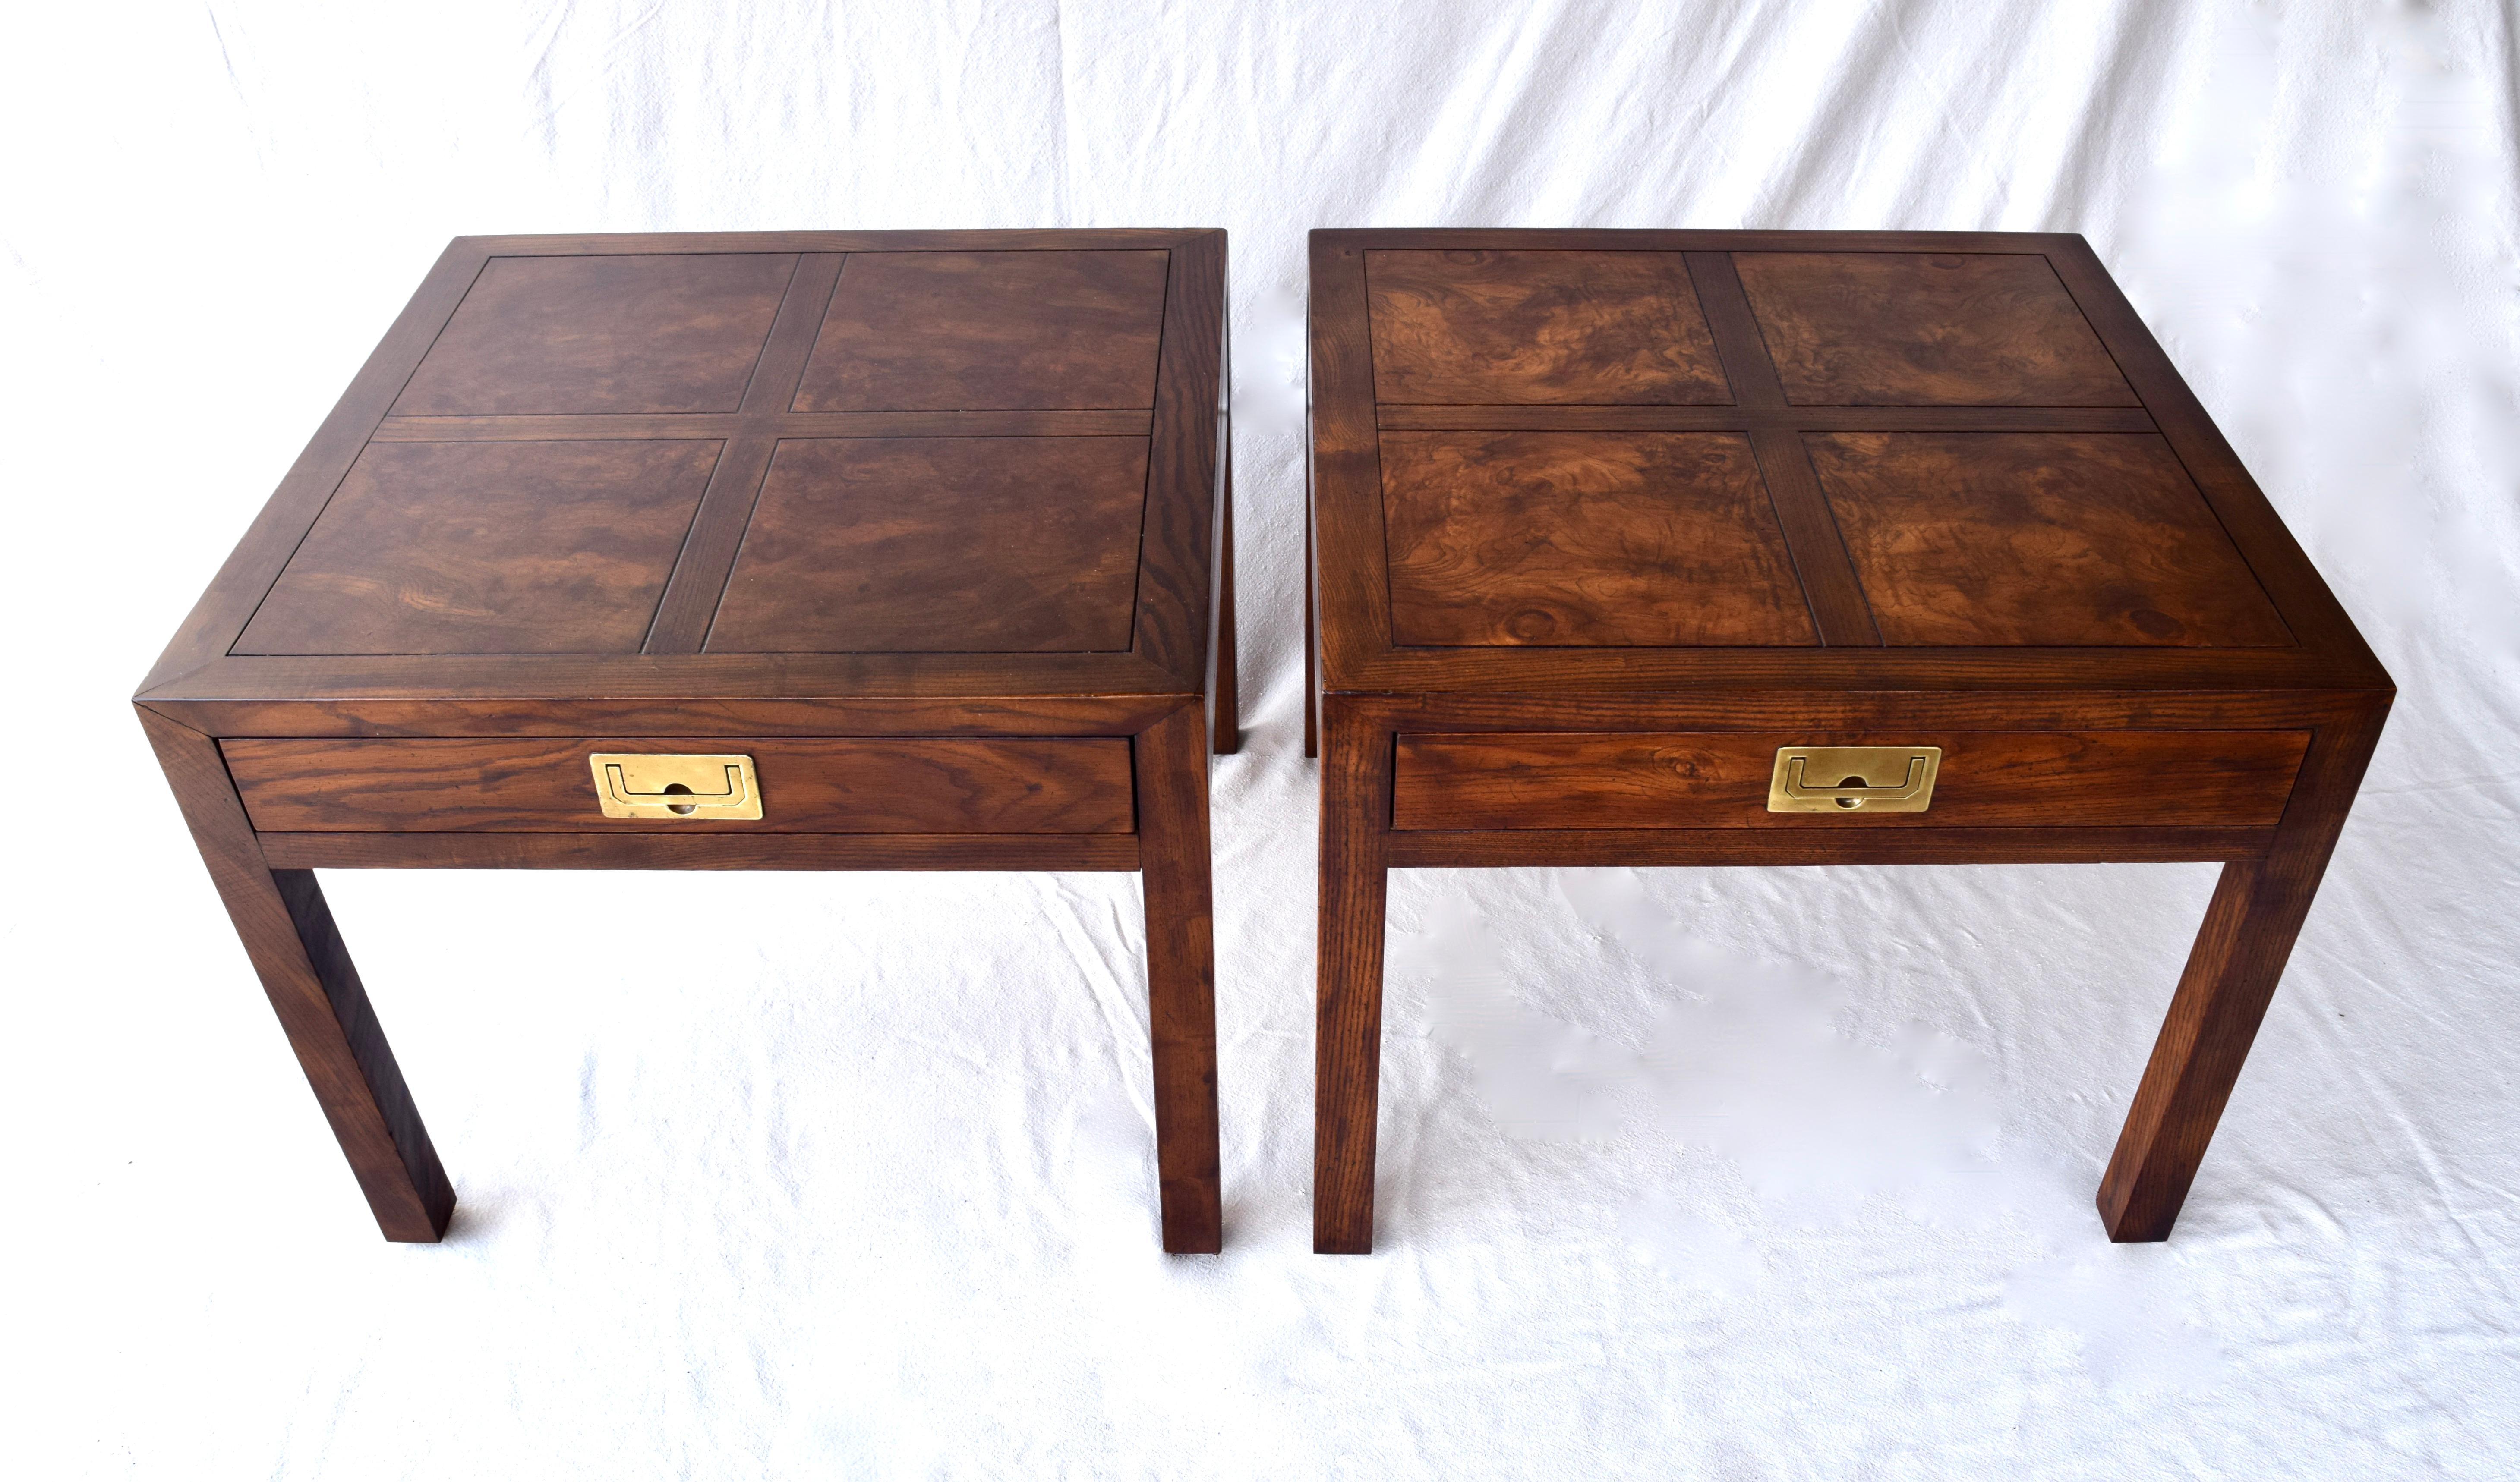 Classic Campaign styling from Henredon, pair of burl walnut parsons side (or end) tables having a single recessed brass pull and striking parquetry tops. 